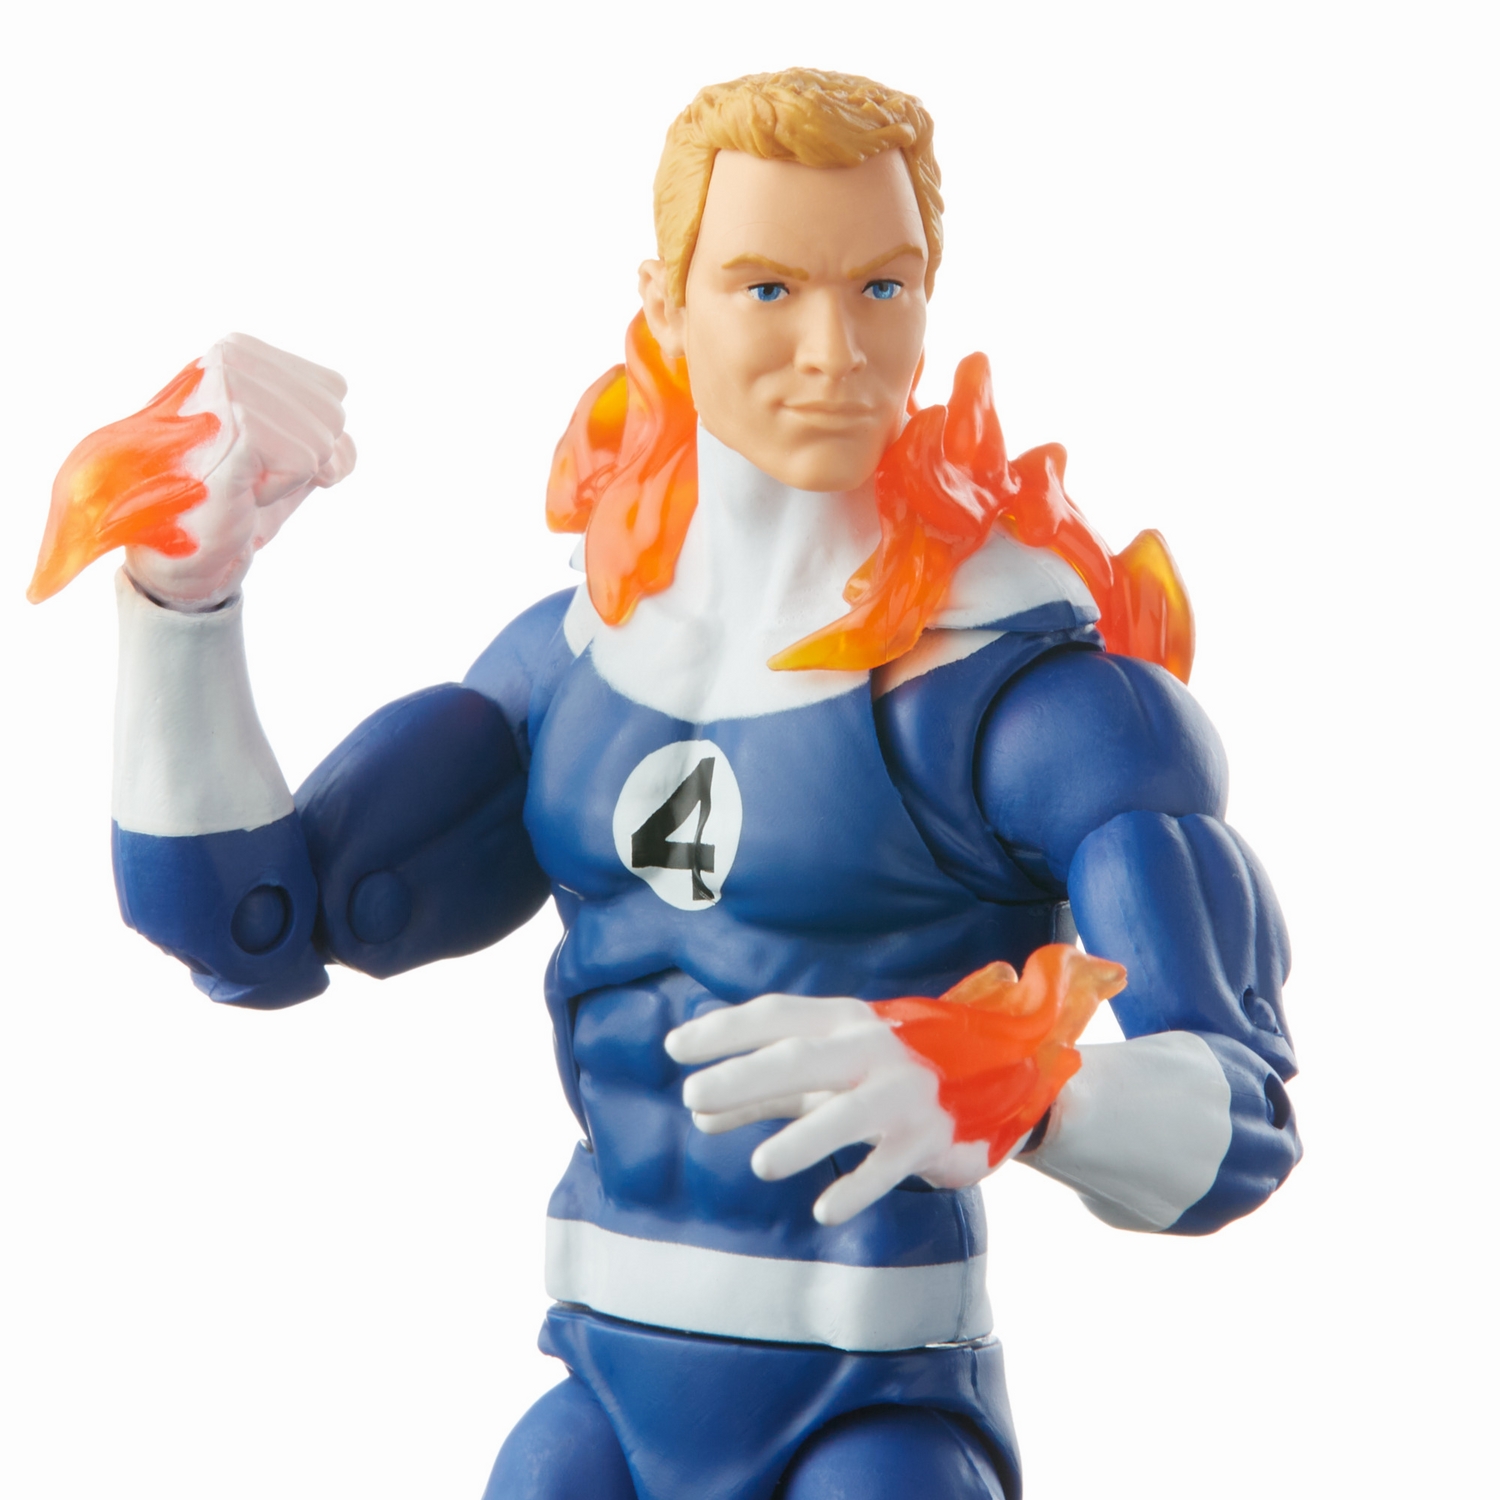 MARVEL LEGENDS SERIES 6-INCH RETRO FANTASTIC FOUR THE HUMAN TORCH Figure (Powered Down)_oop 2.jpg